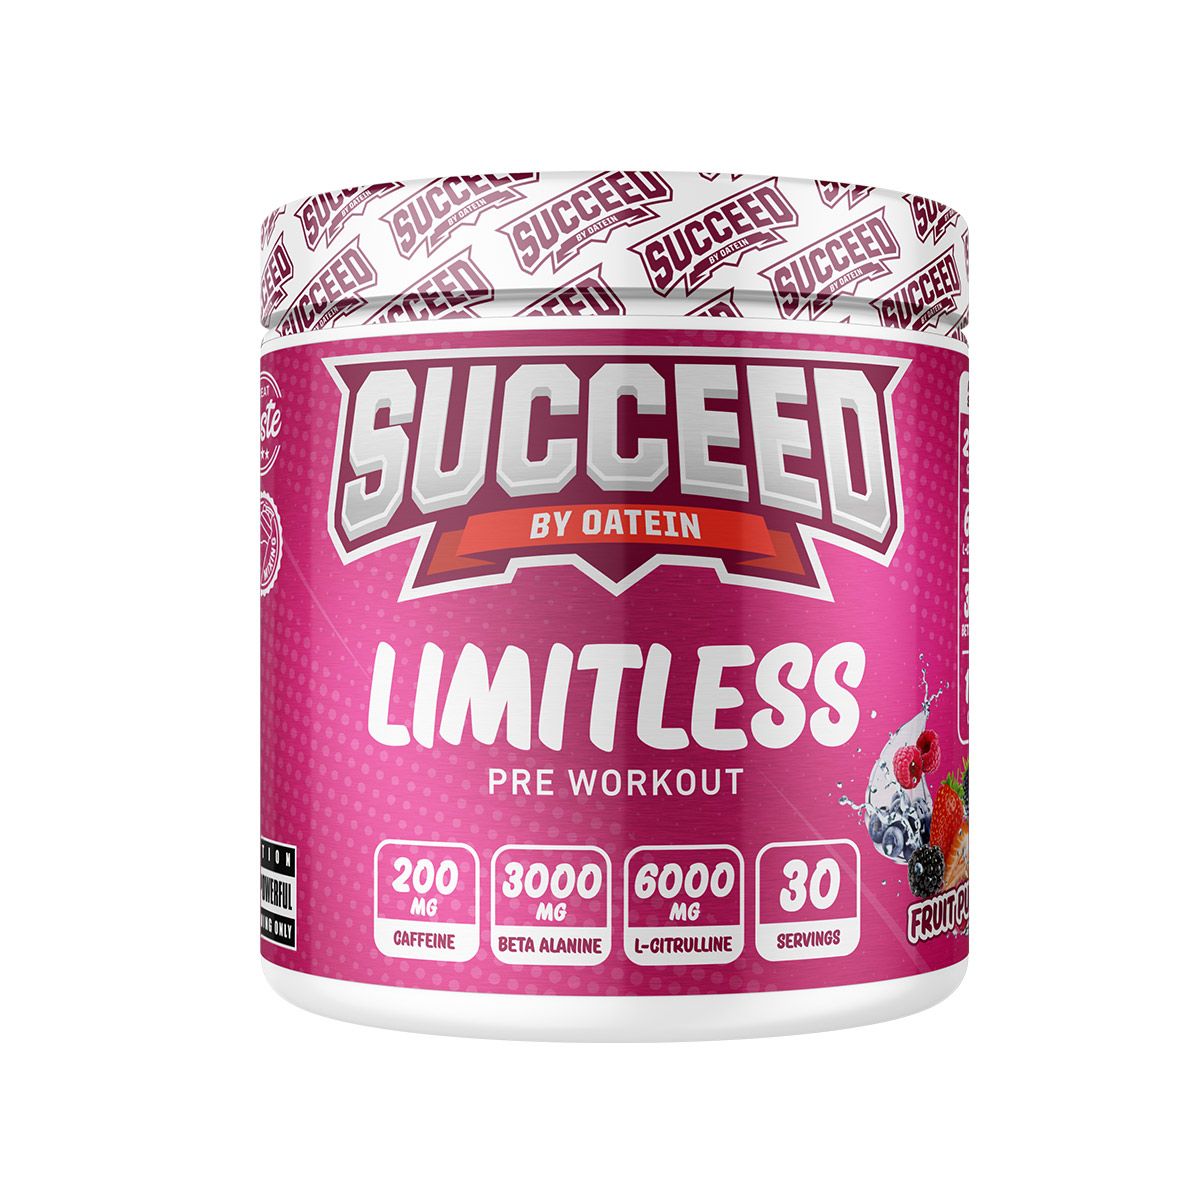 Oatein Succeed Limitless Pre-Workout - Fruit Punch 360g